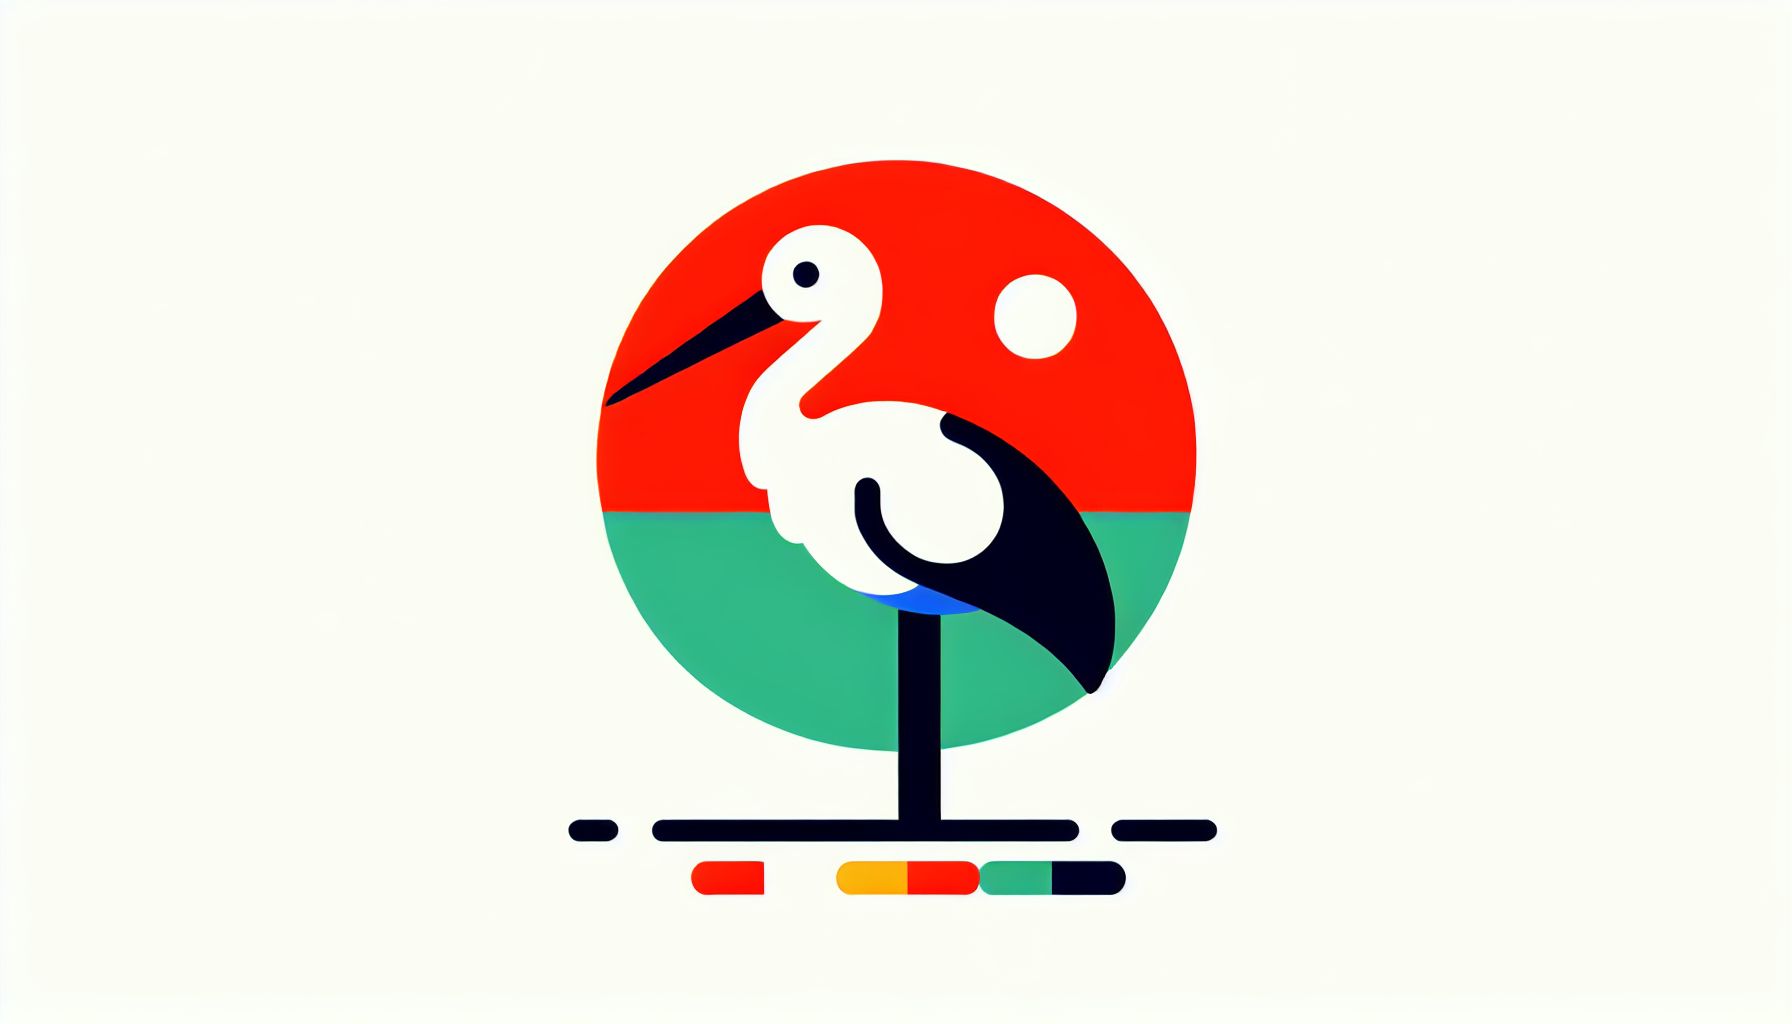 Stork in flat illustration style and white background, red #f47574, green #88c7a8, yellow #fcc44b, and blue #645bc8 colors.